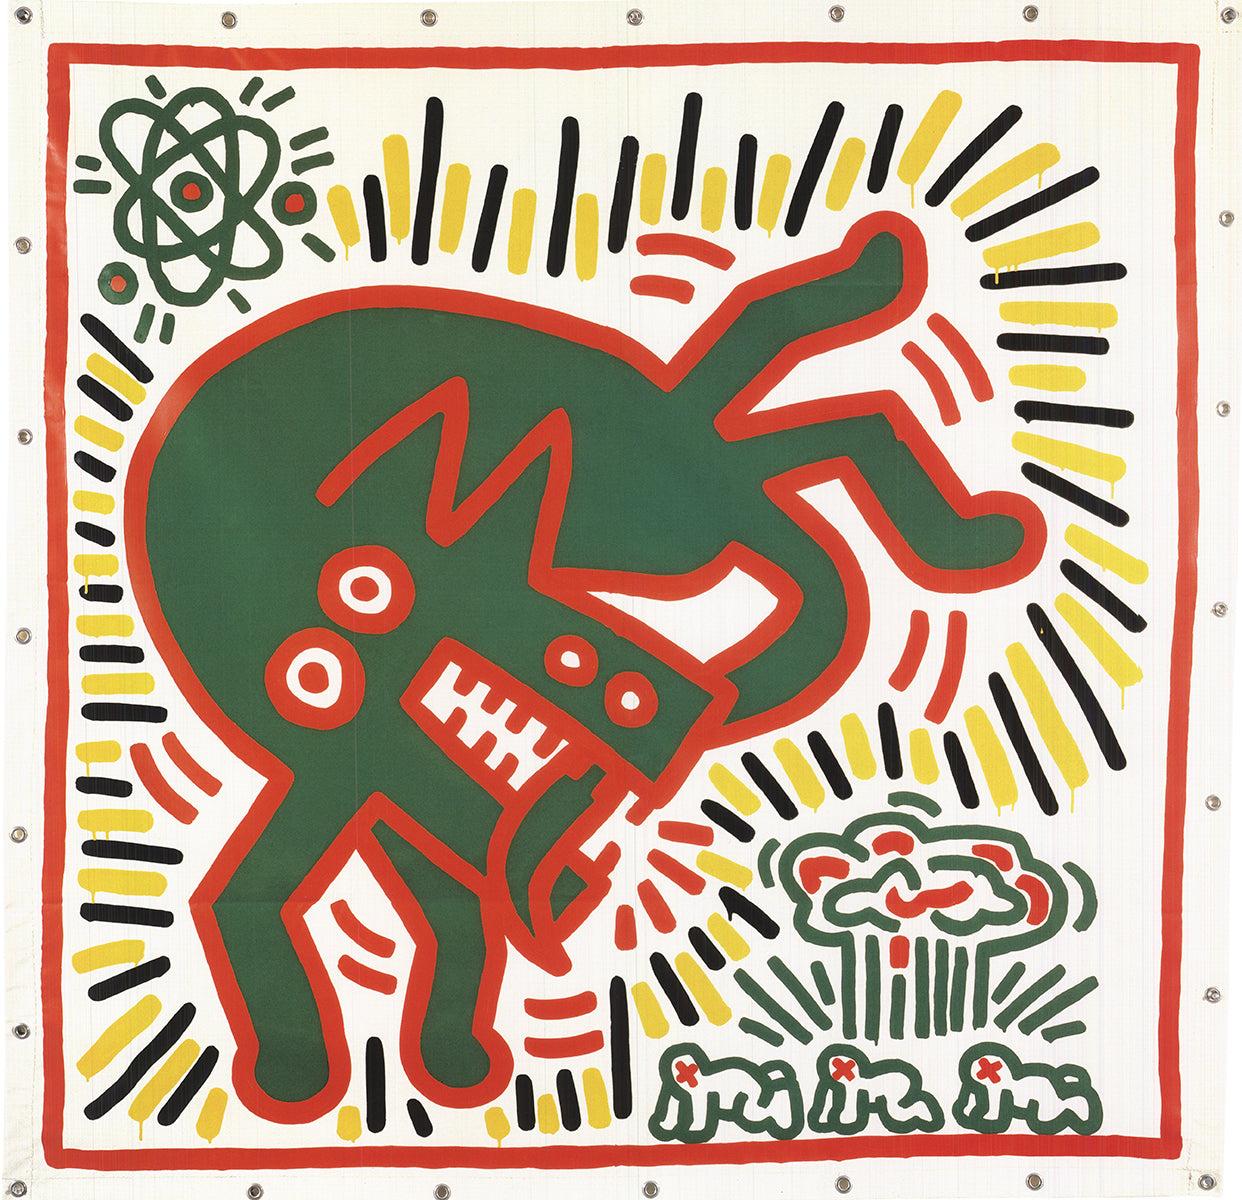 Offsetlithographie „Ohne Titel“, Keith Haring, 1983“, Offsetlithographie 2008 im Angebot 1